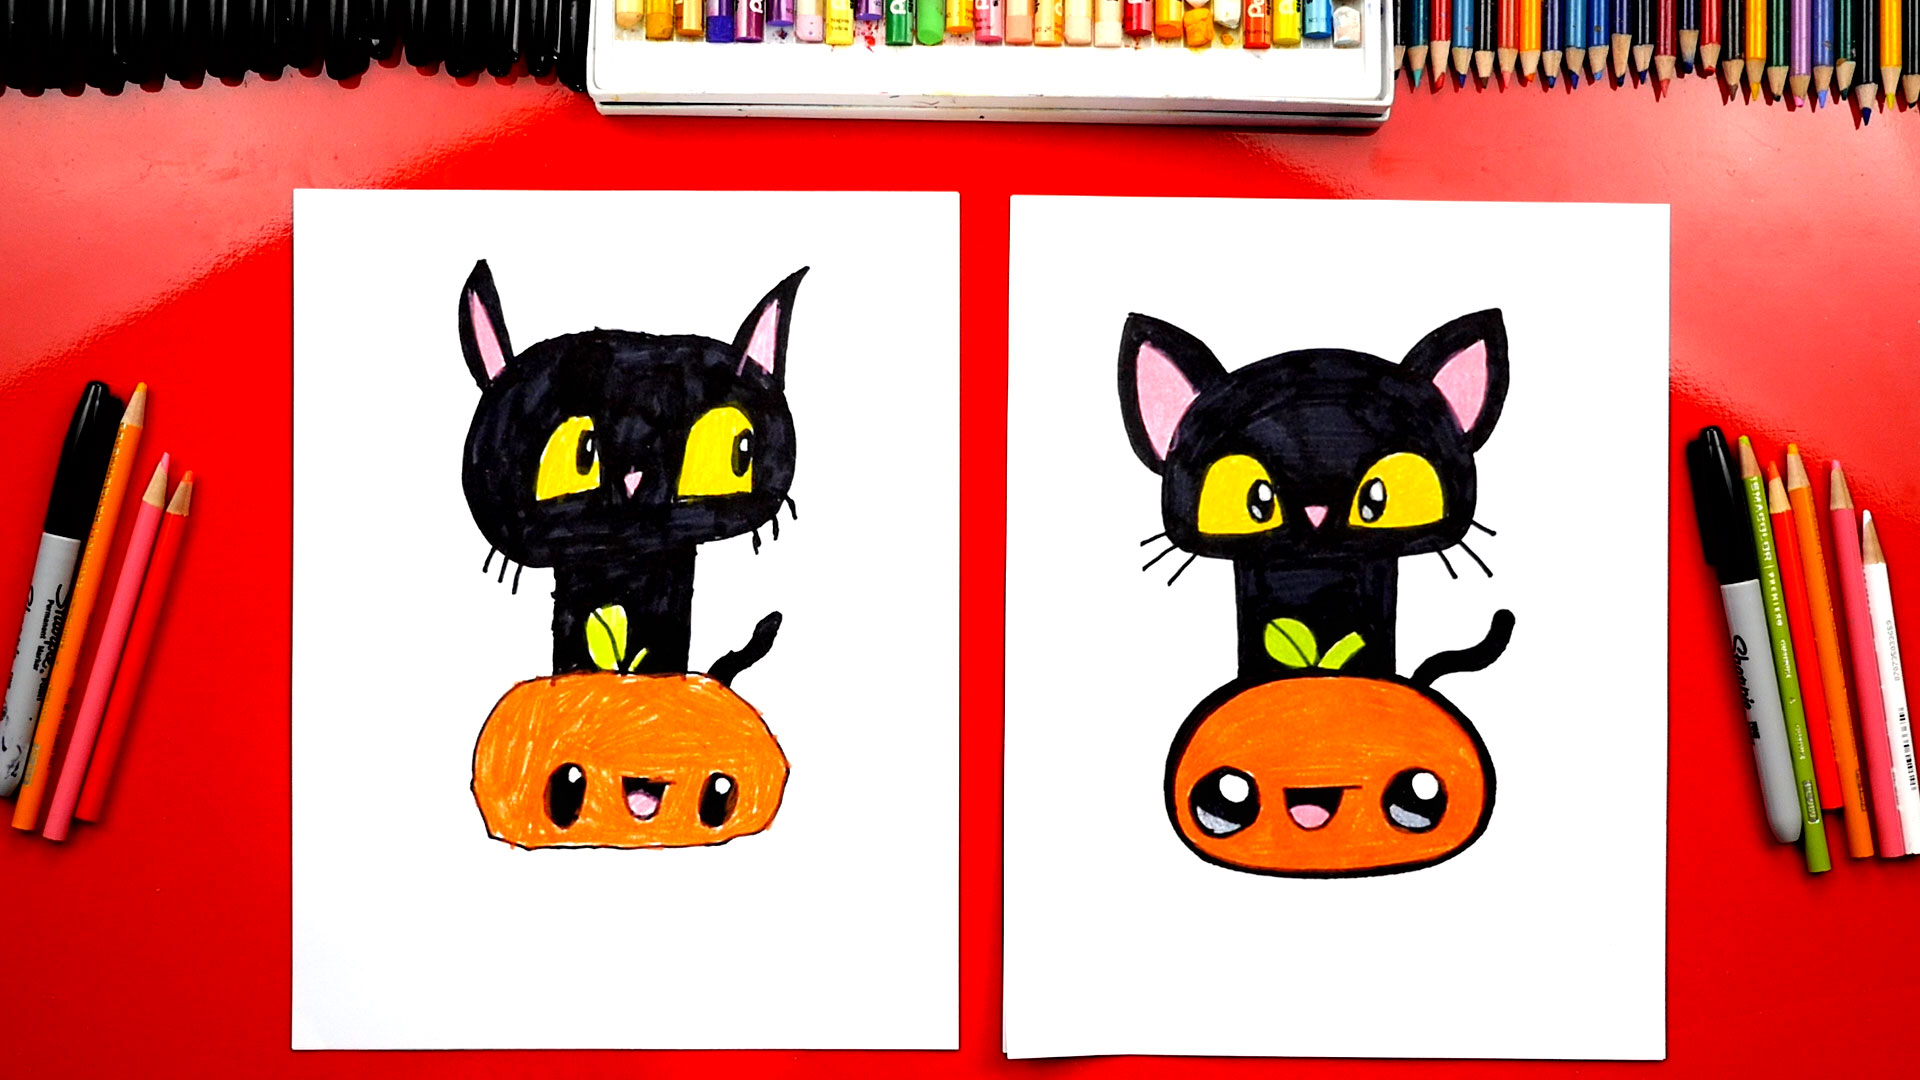 How to draw a black cat for halloween gail's blog